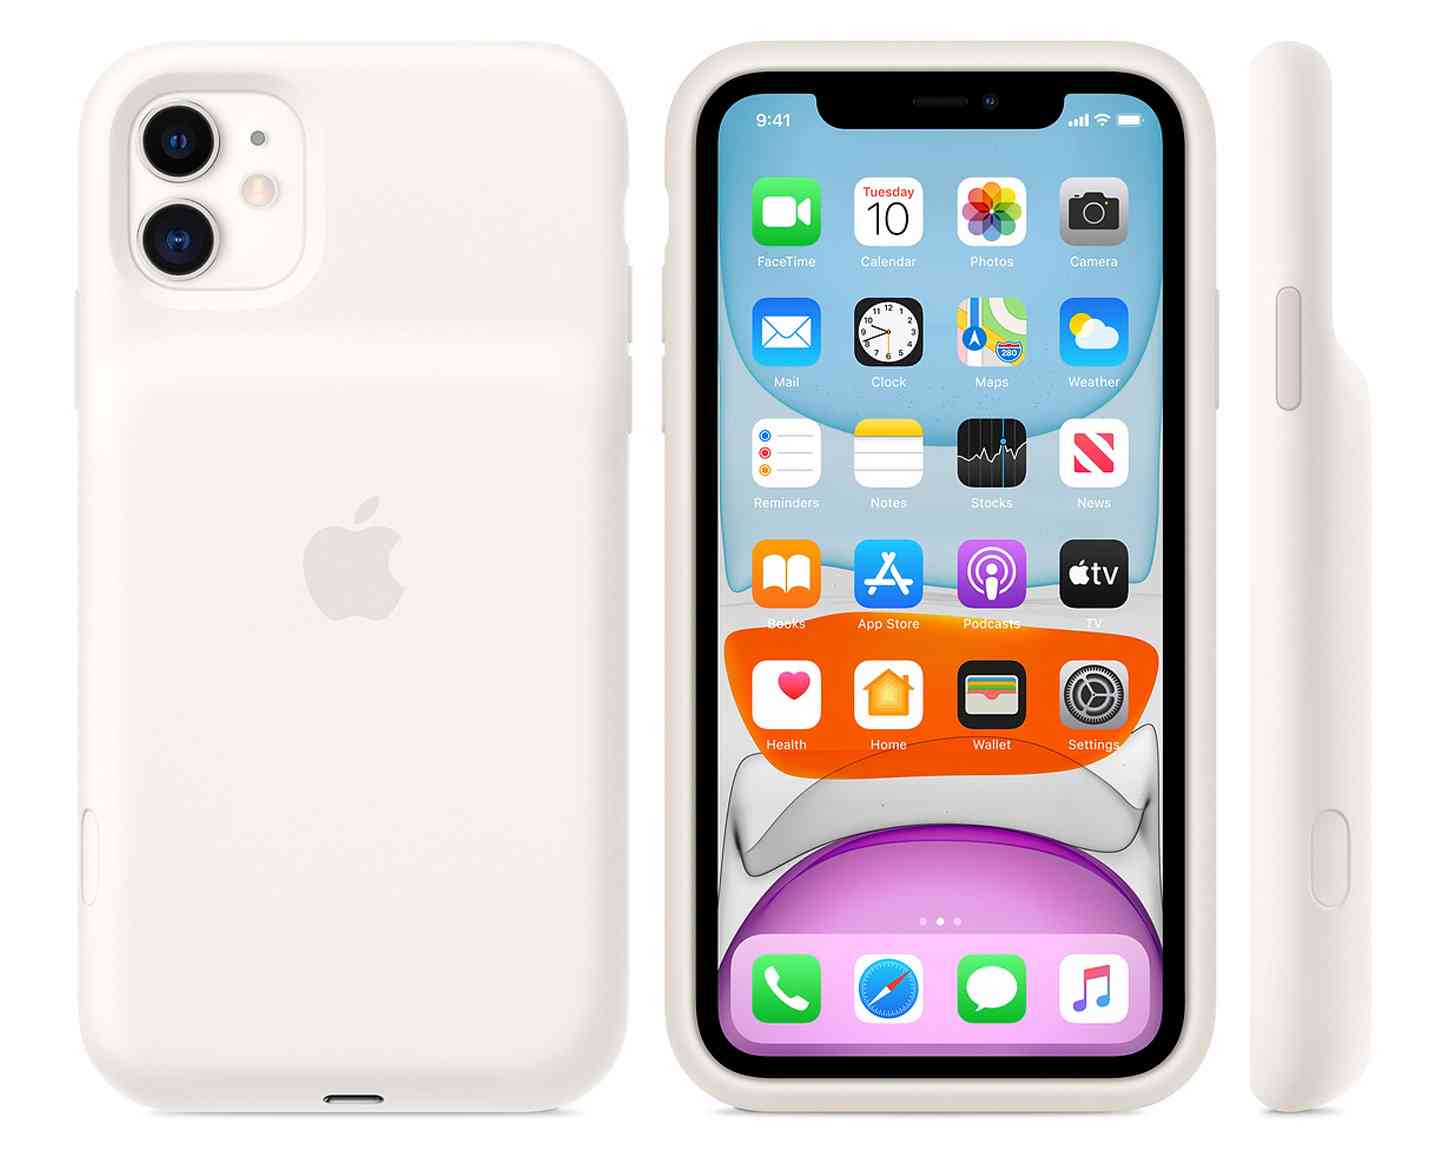 iPhone 11 Smart Battery Case official